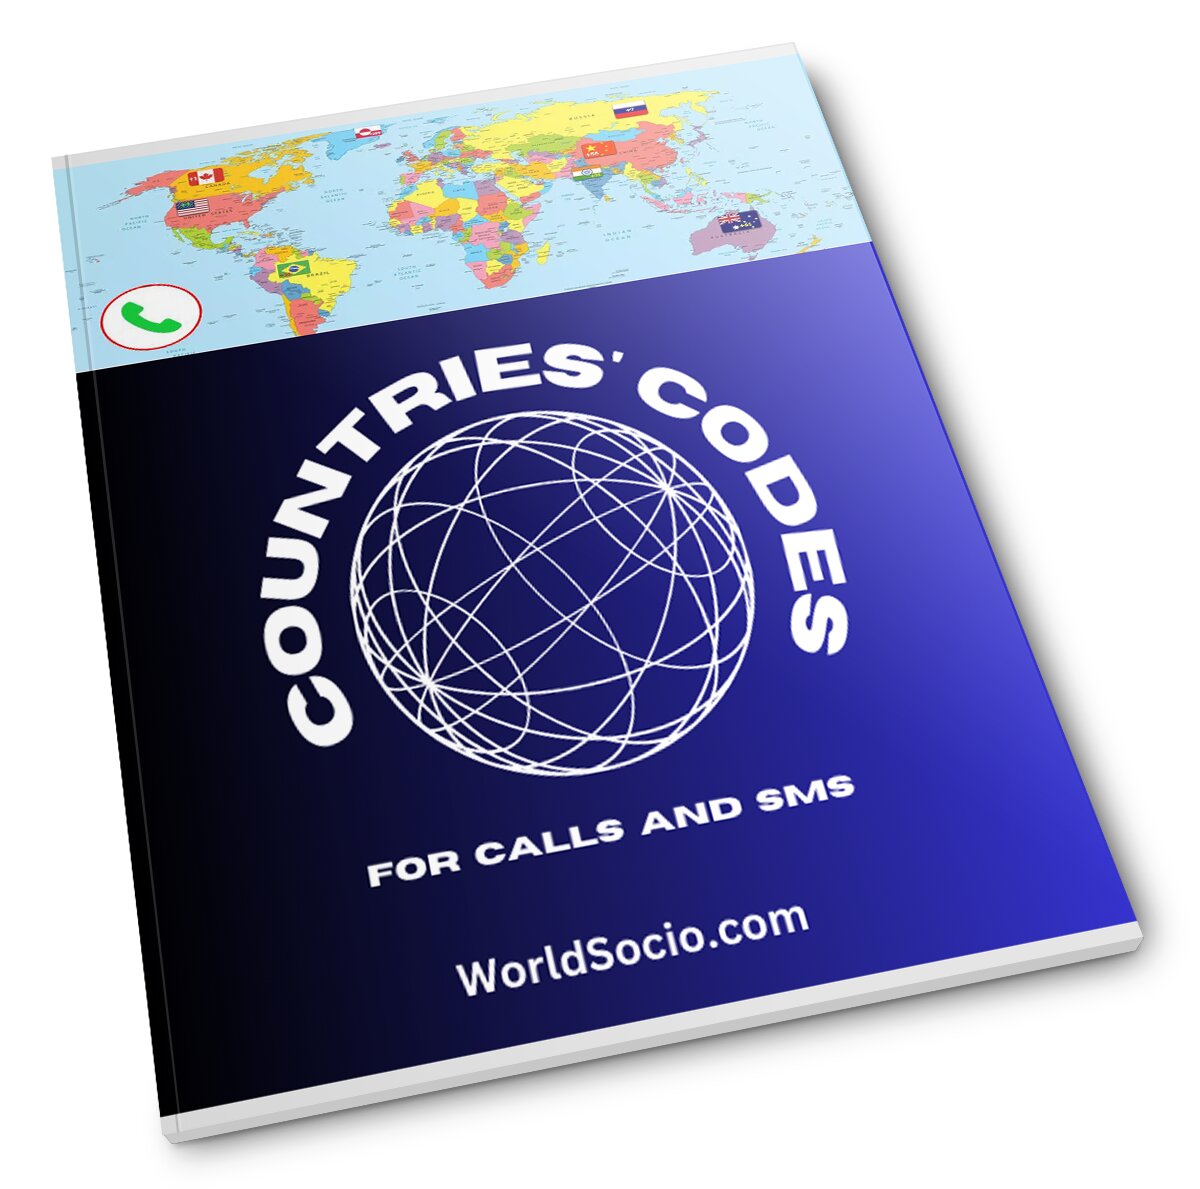 International-Countries'-Mobile-Network-Codes-For-Calling-And-SMS.jpg